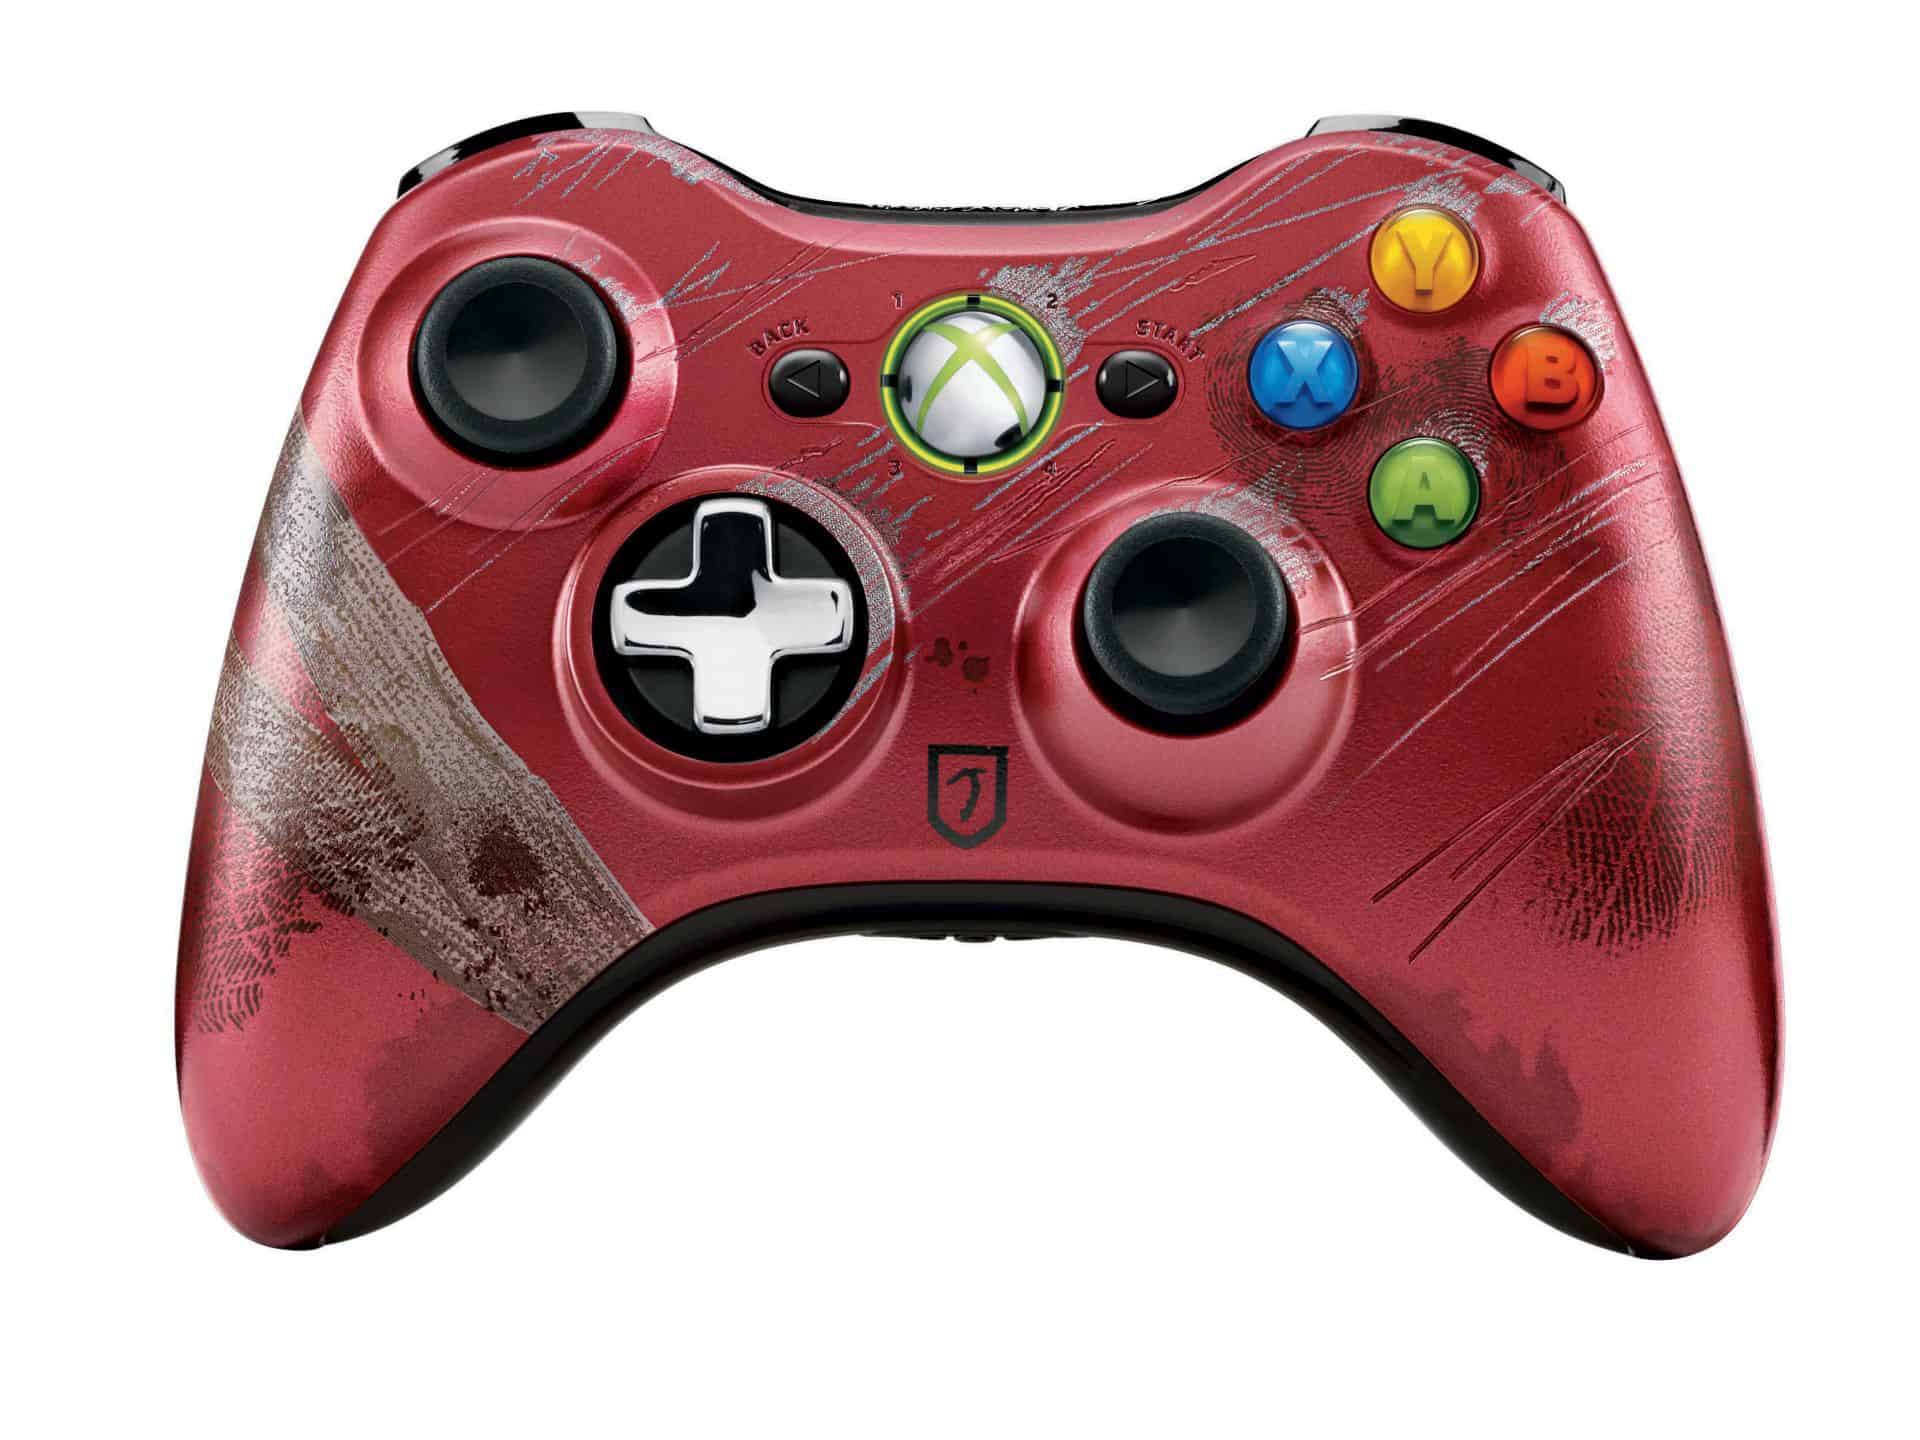 Tomb Raider Gets Limited Edition Xbox 360 Controller | Dual Pixels